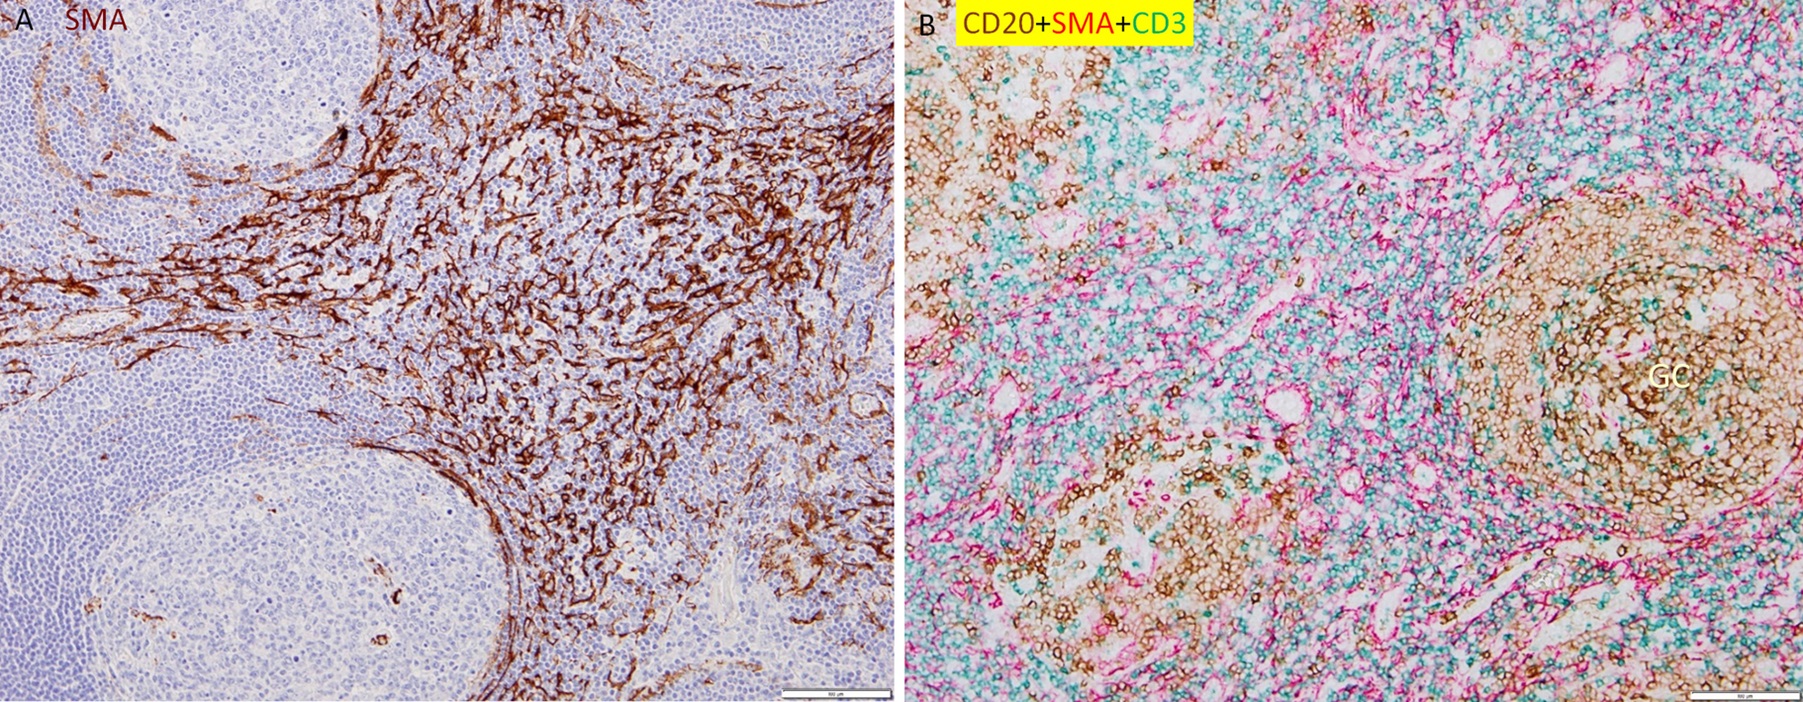 C-C Chemokine 21-Expressing T-cell Zone Fibroblastic Reticular Cells, Abundant in Lymph Nodes, Are Absent in Cancer Lymphoid Stroma